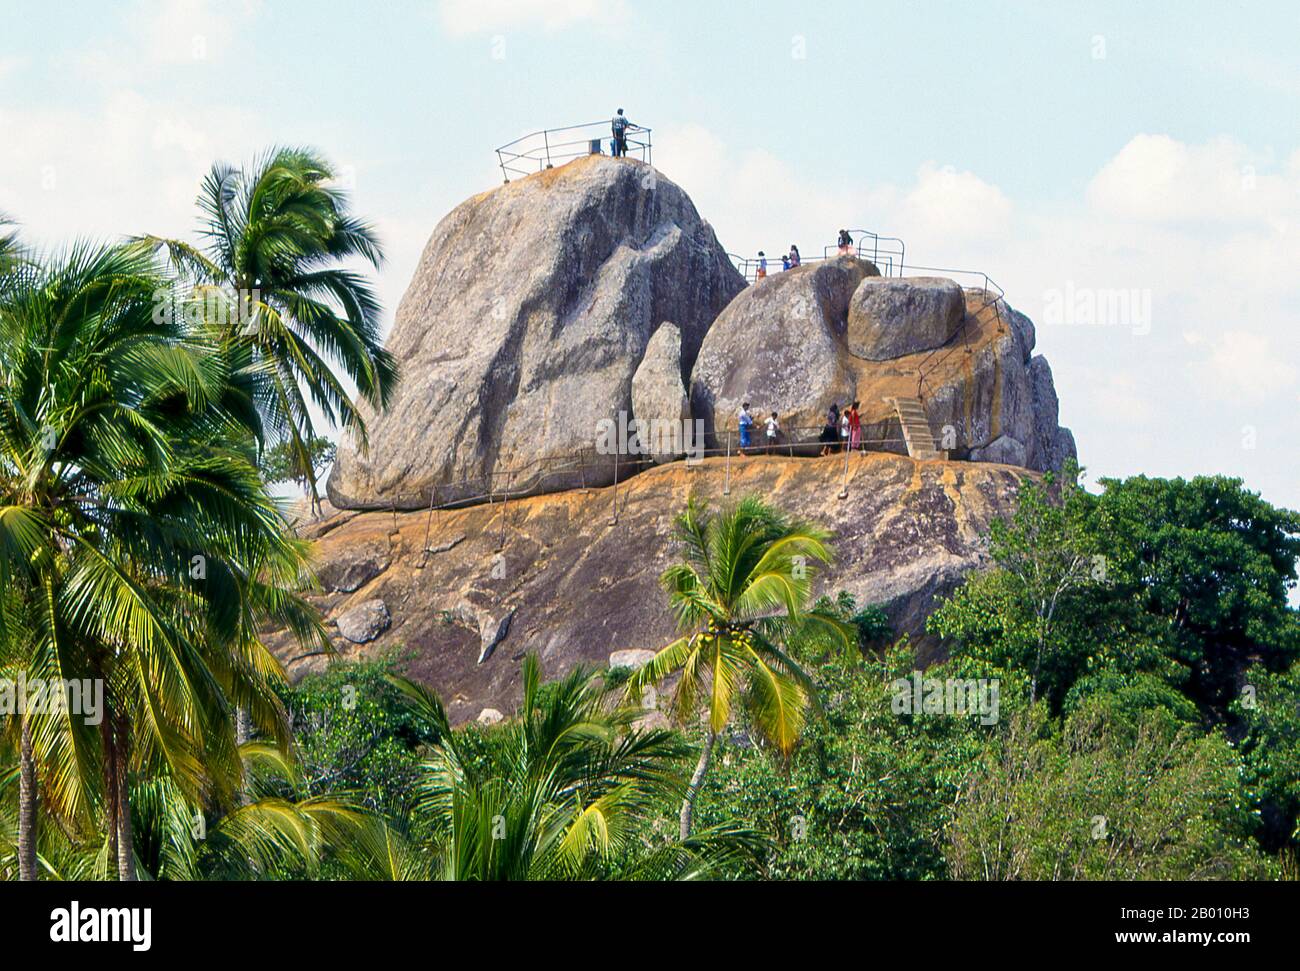 Sri Lanka: Visitors atop Aradhana Gala (Meditation Rock), Mihintale.  Mihintale is a mountain peak near Anuradhapura that is believed by Sri Lankans to be the site of a meeting between the Buddhist monk Mahinda and King Devanampiyatissa which inaugurated the presence of Buddhism in Sri Lanka. It is now a pilgrimage site, and the site of several religious monuments and abandoned structures. Stock Photo